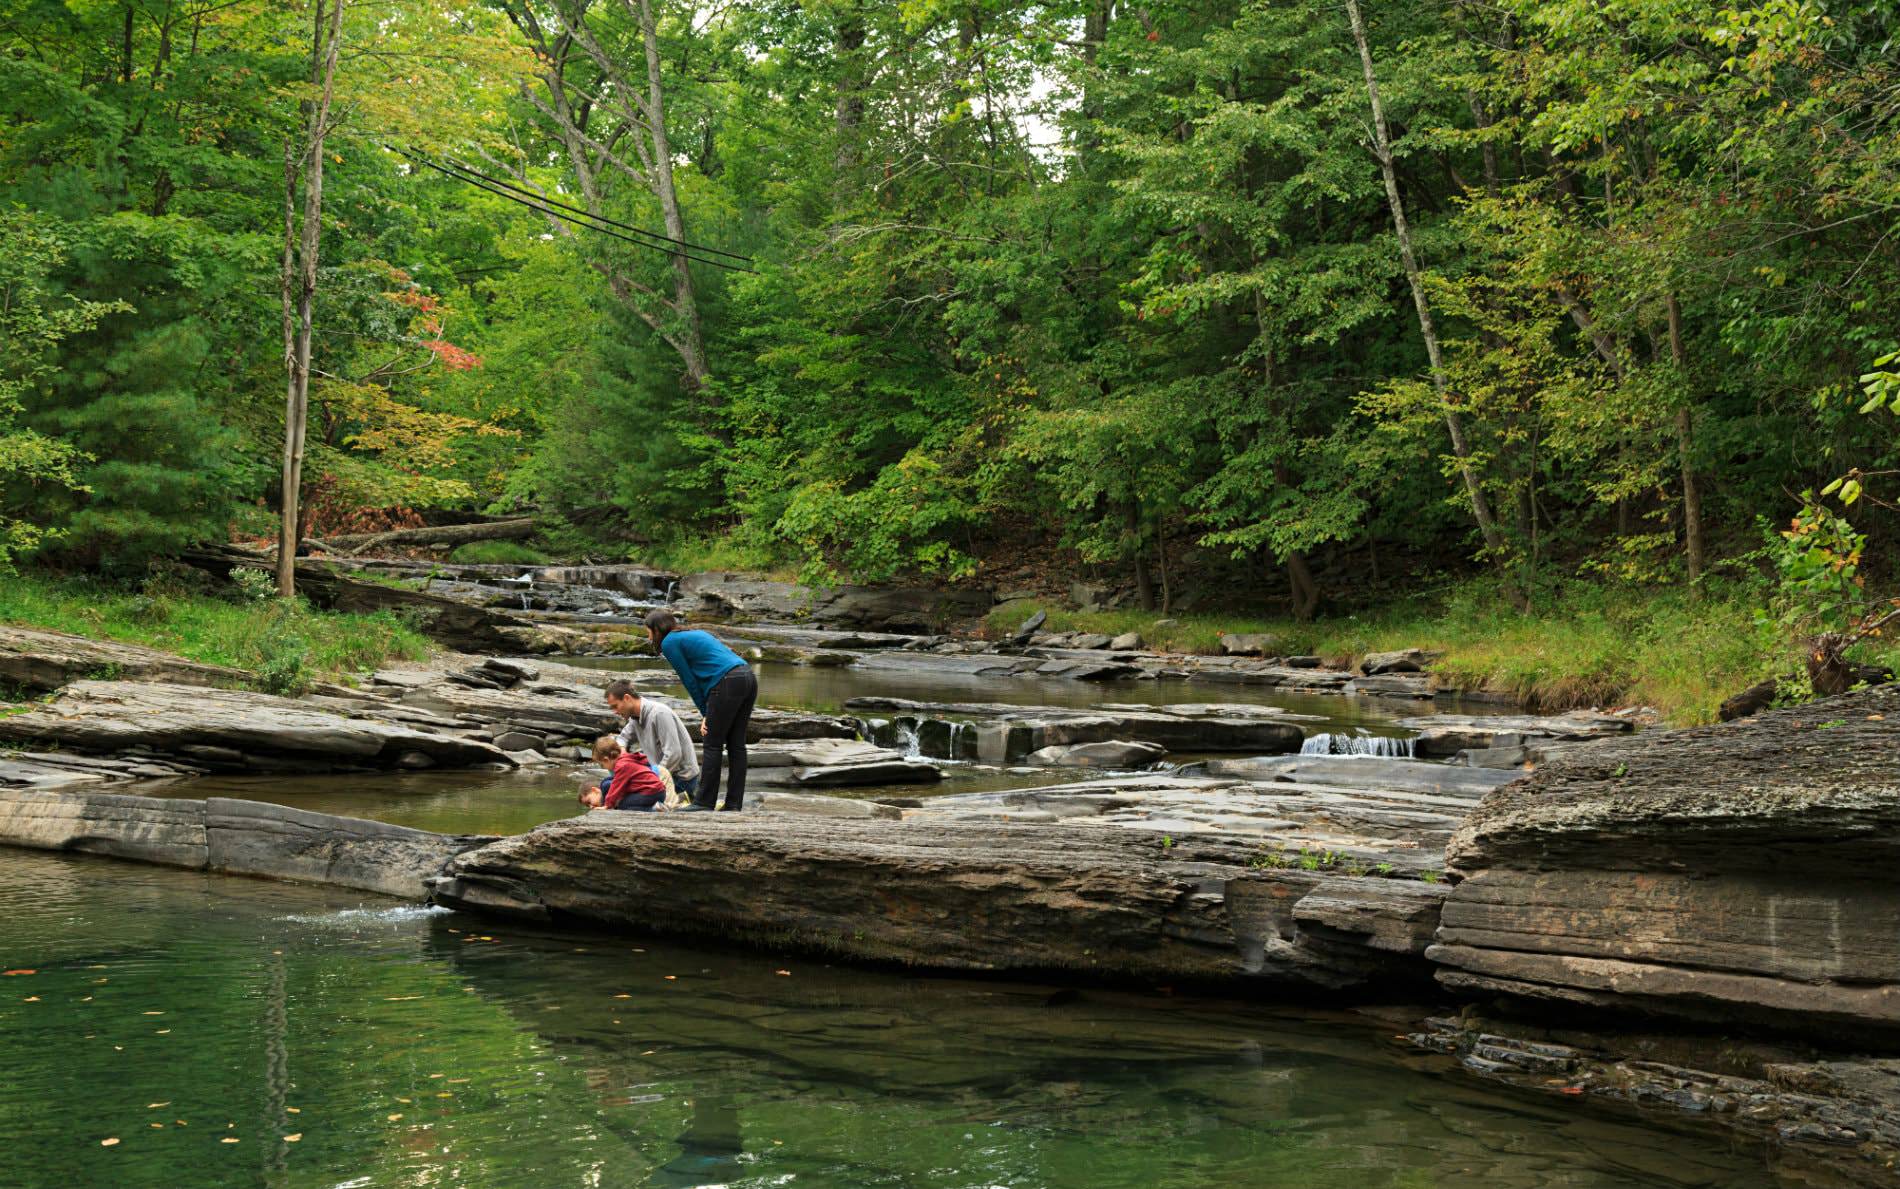 A father, mother and their two boys on a small rocky ledge overlooking the stream surrounded by green woods